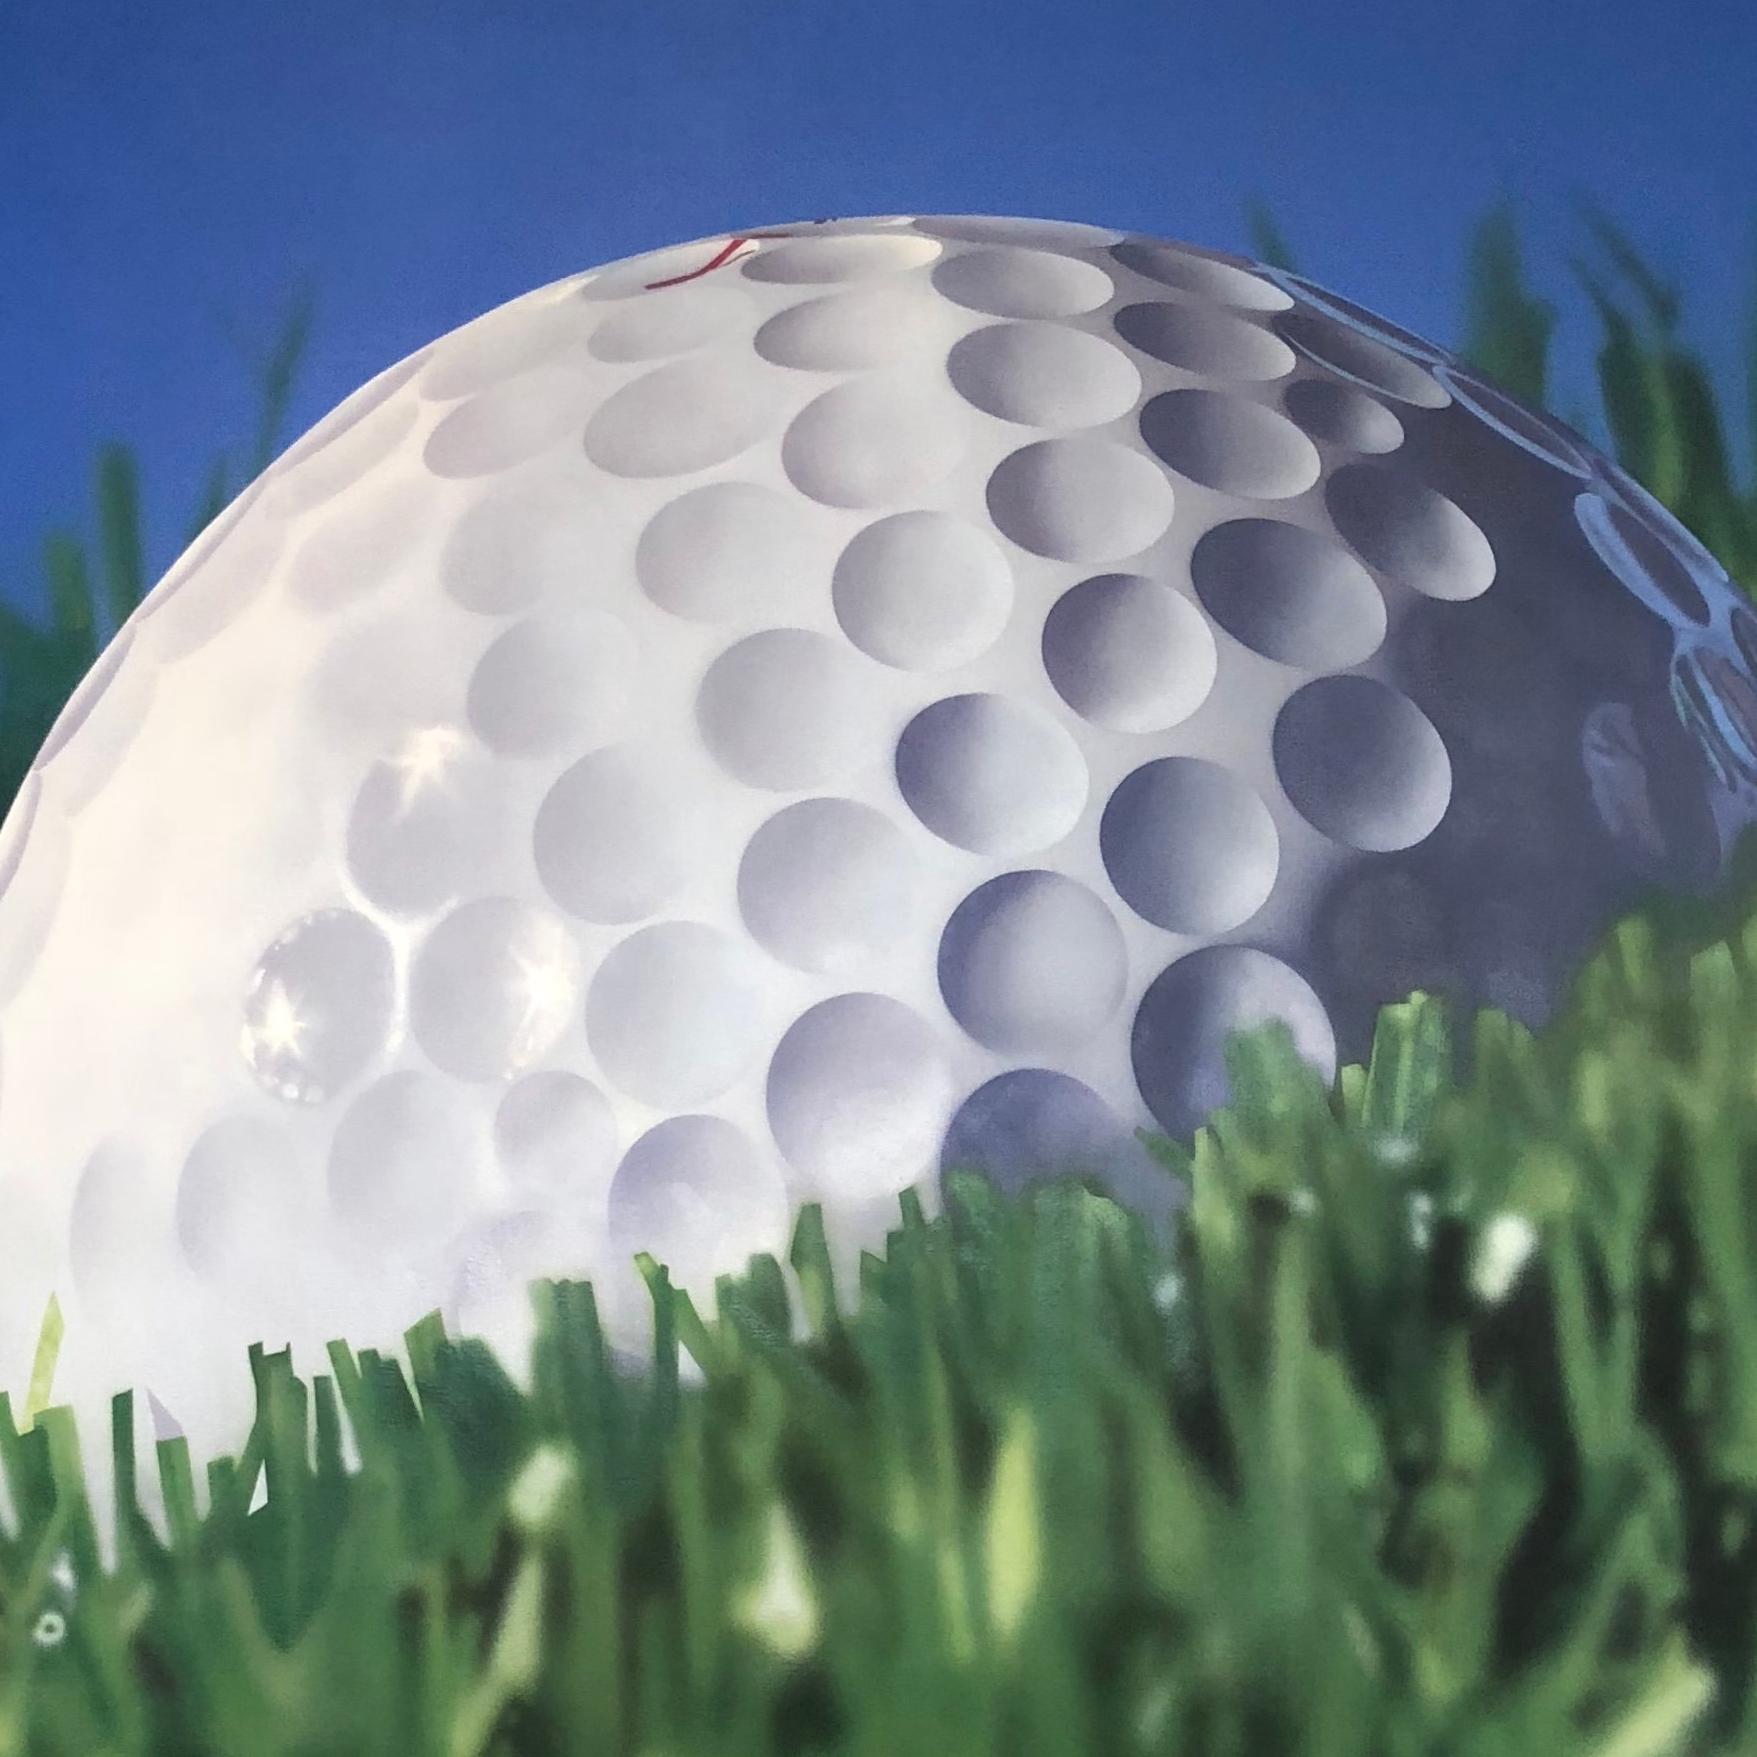 <p>Artist Comments<br />This is the fourth piece in a series of ten. I actually grew my own small plot of golf course grass in a container. This is a depiction of the golf ball on the edge of the fairway next to the first cut of rough. The golf ball